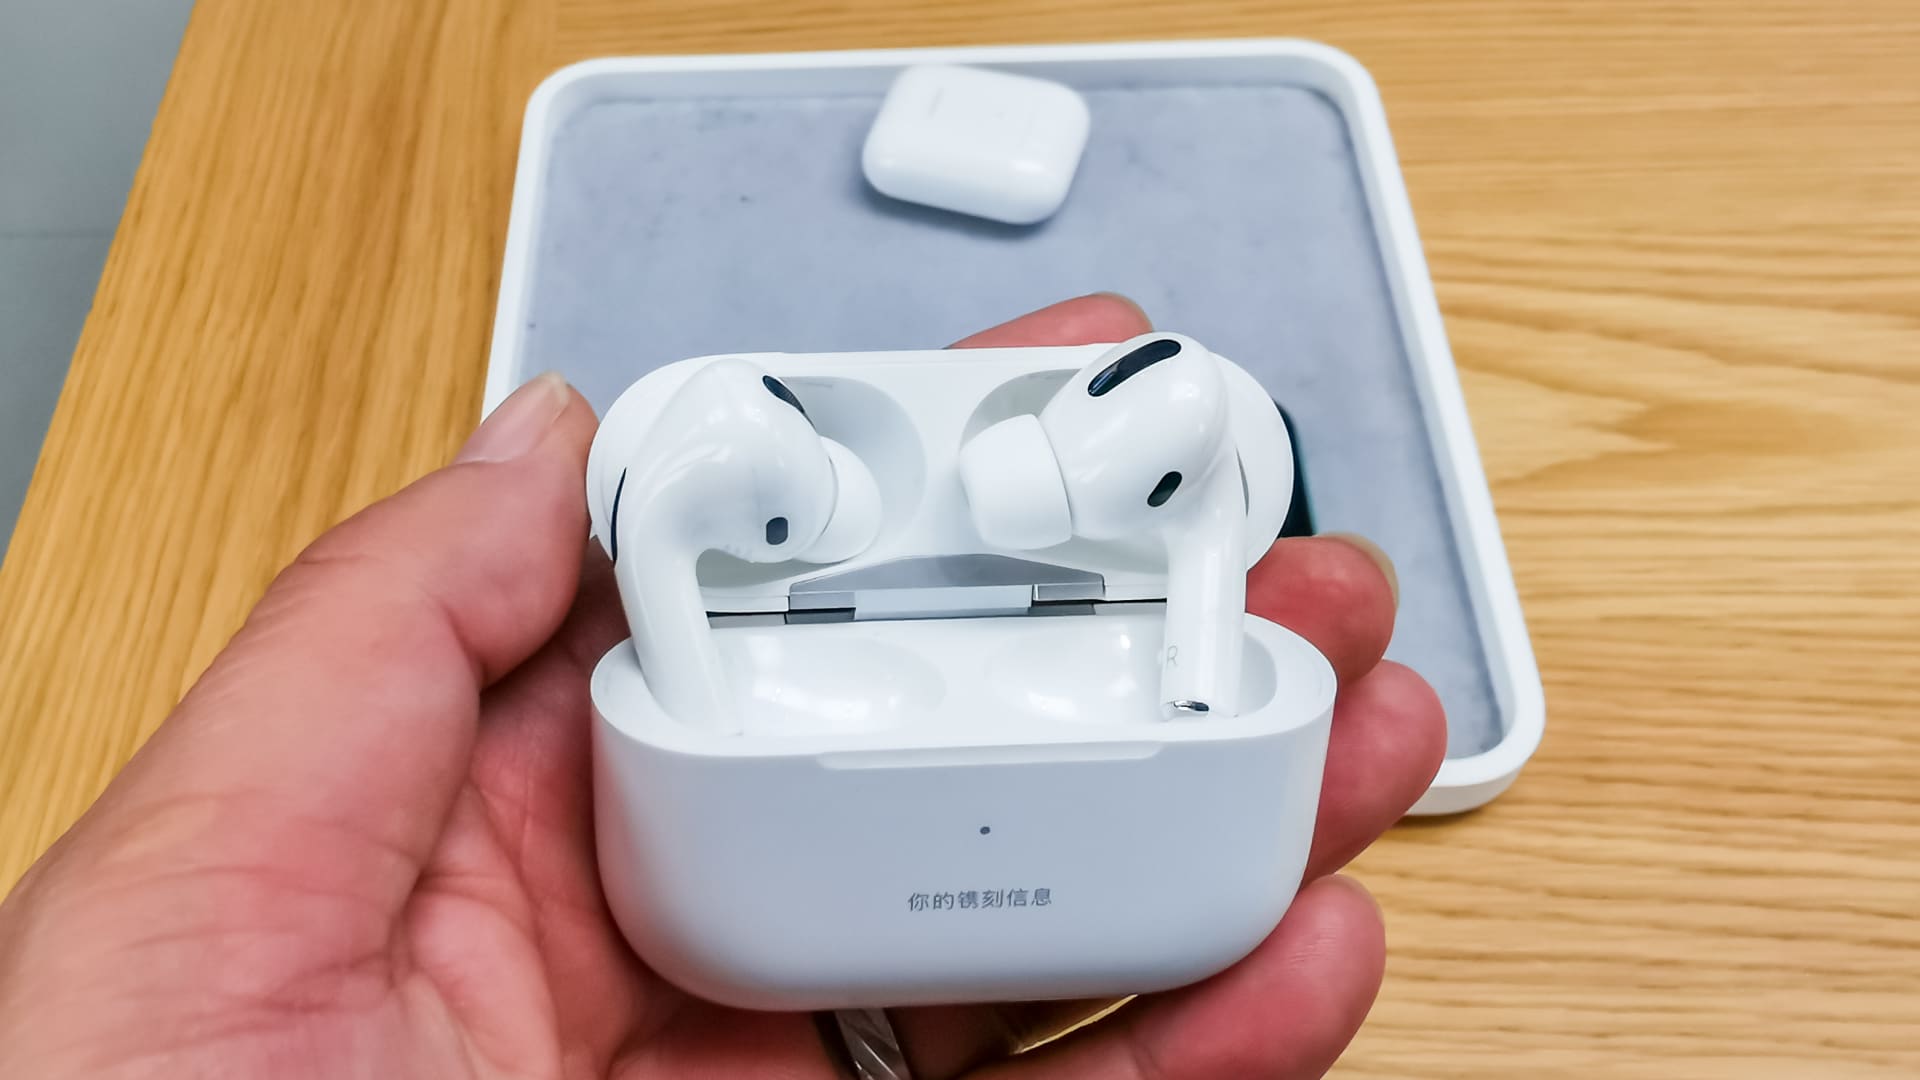 A man shows AirPods Pro at an Apple store on East Nanjing Road on October 30, 2019 in Shanghai, China. Apple's new AirPods Pro with active noise cancellation are on sale on October 30 in China.